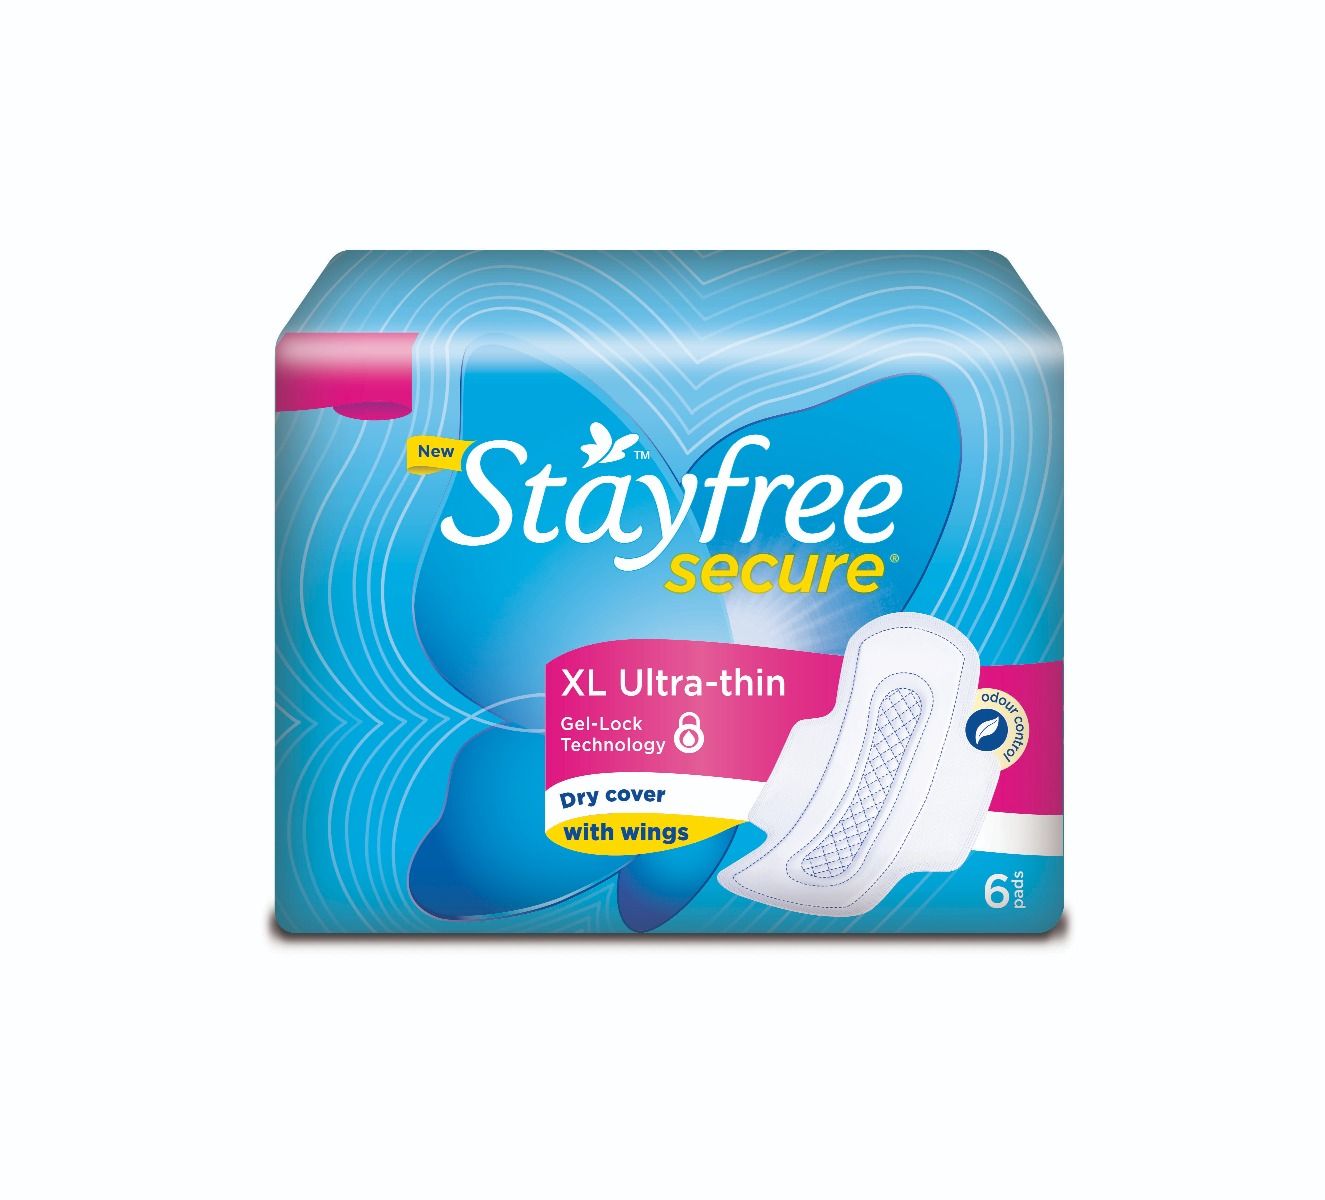 Stayfree Secure Ultra-Thin Dry Cover Pads With Wings XL, 6 Count, Pack of 1 